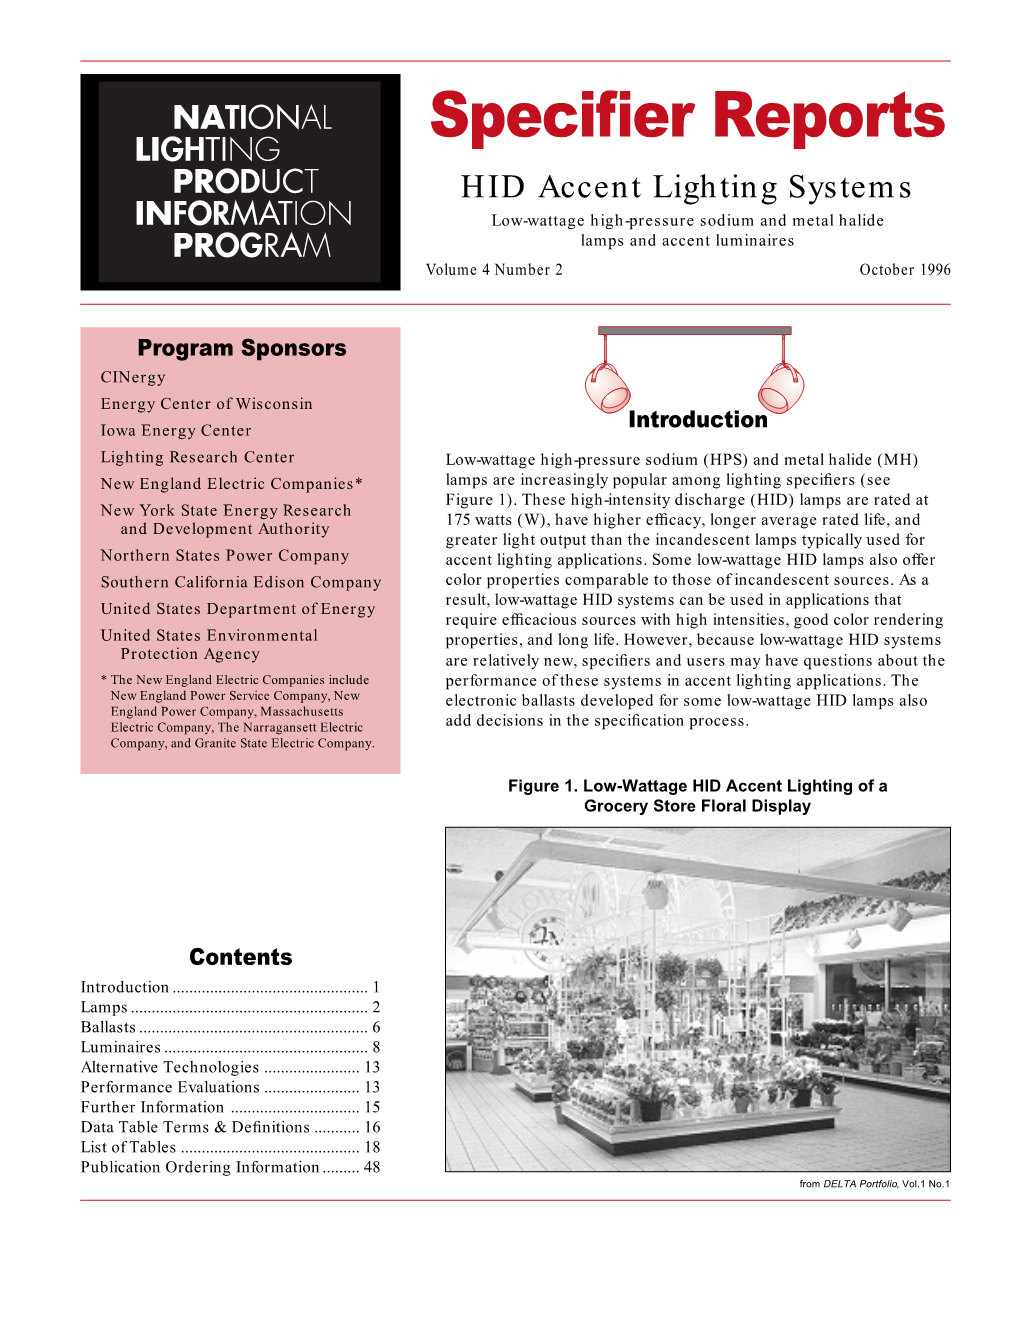 HID Accent Lighting Systems Low-Wattage High-Pressure Sodium and Metal Halide Lamps and Accent Luminaires Volume 4 Number 2 October 1996